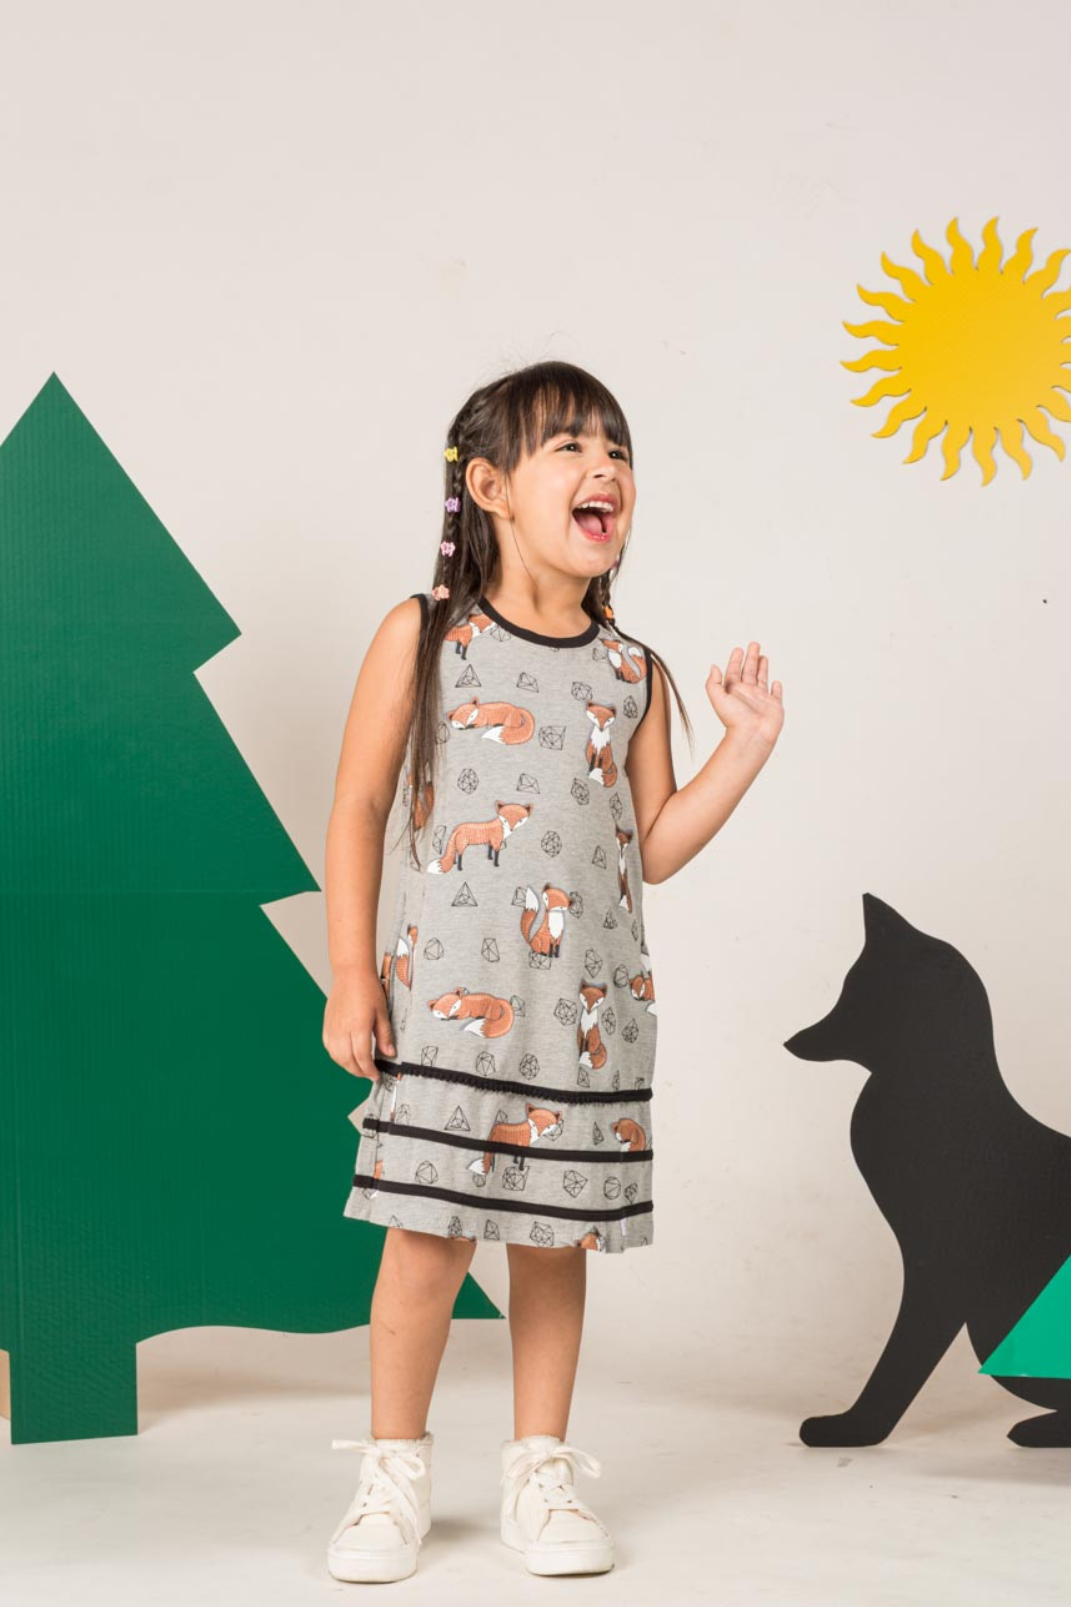 Grey dress with foxes and pockets. Sustainable materials, kids fashion, girl dress - Prisma Kiddos